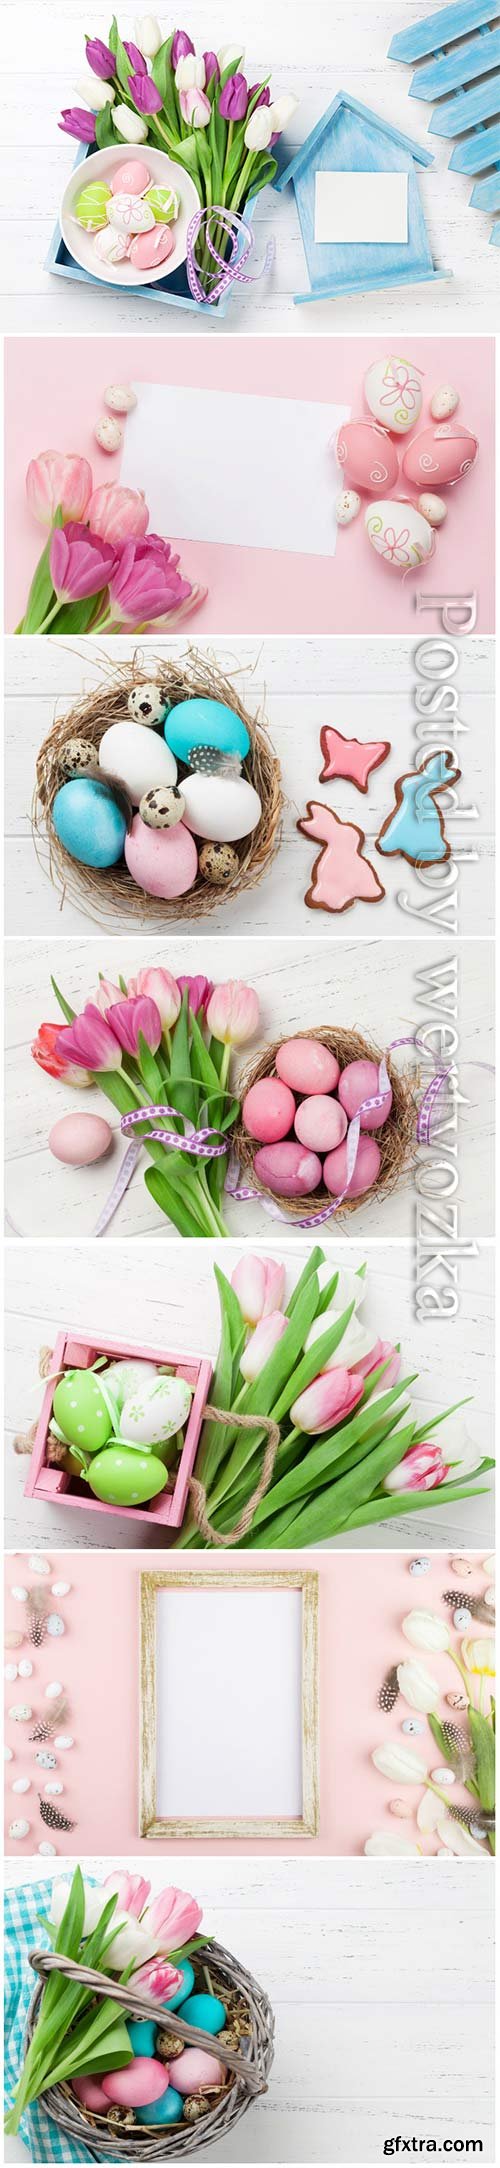 Happy Easter stock photo, Easter eggs, spring flowers # 7